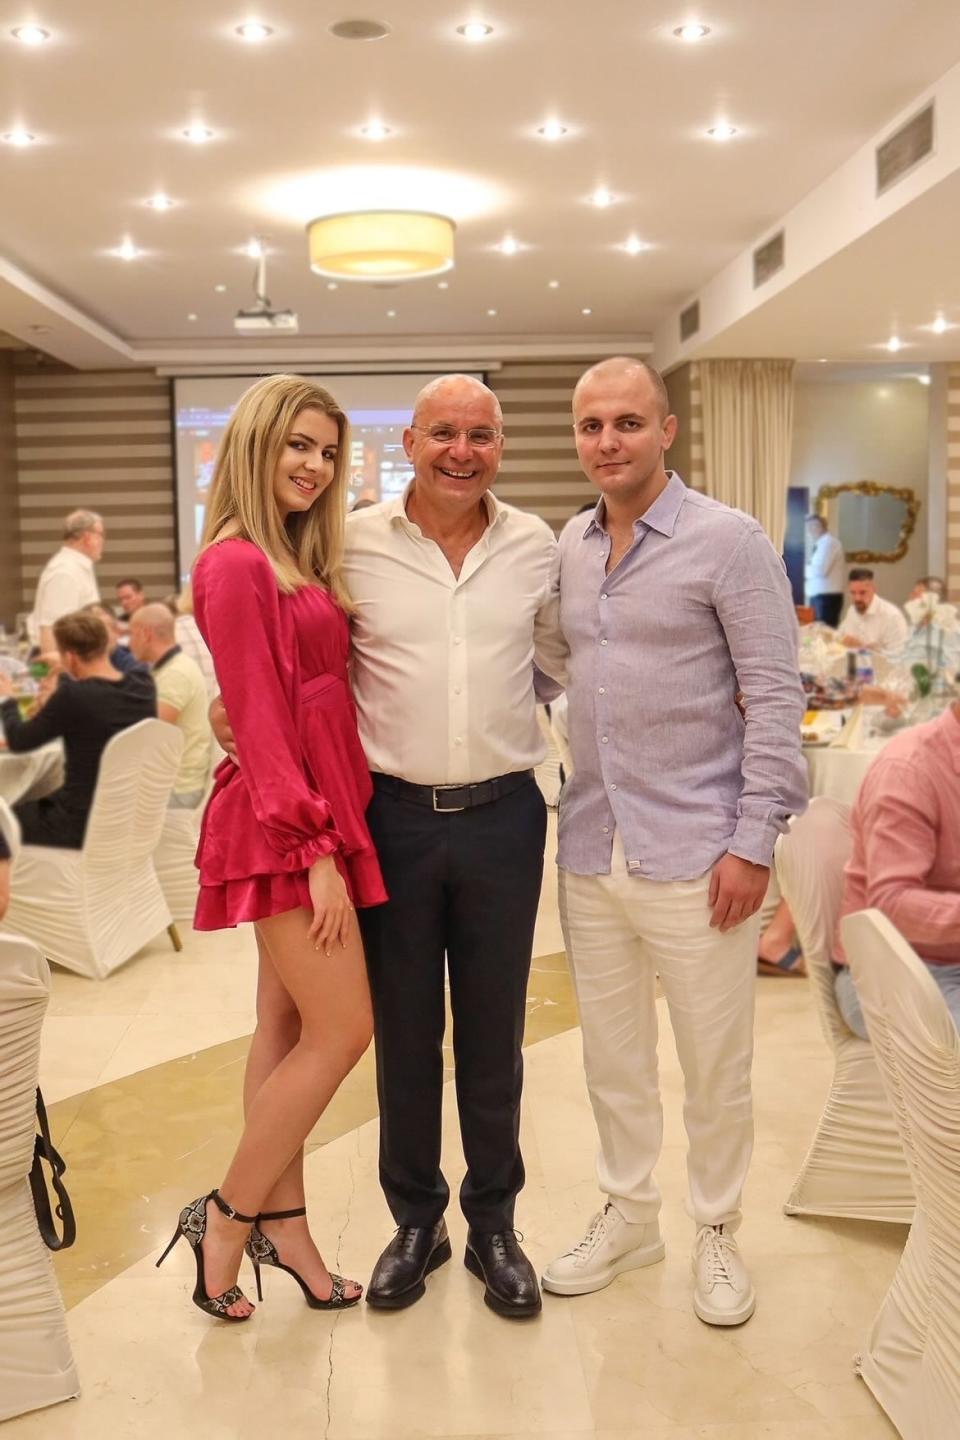 From left: Gușă with her father and her uncle